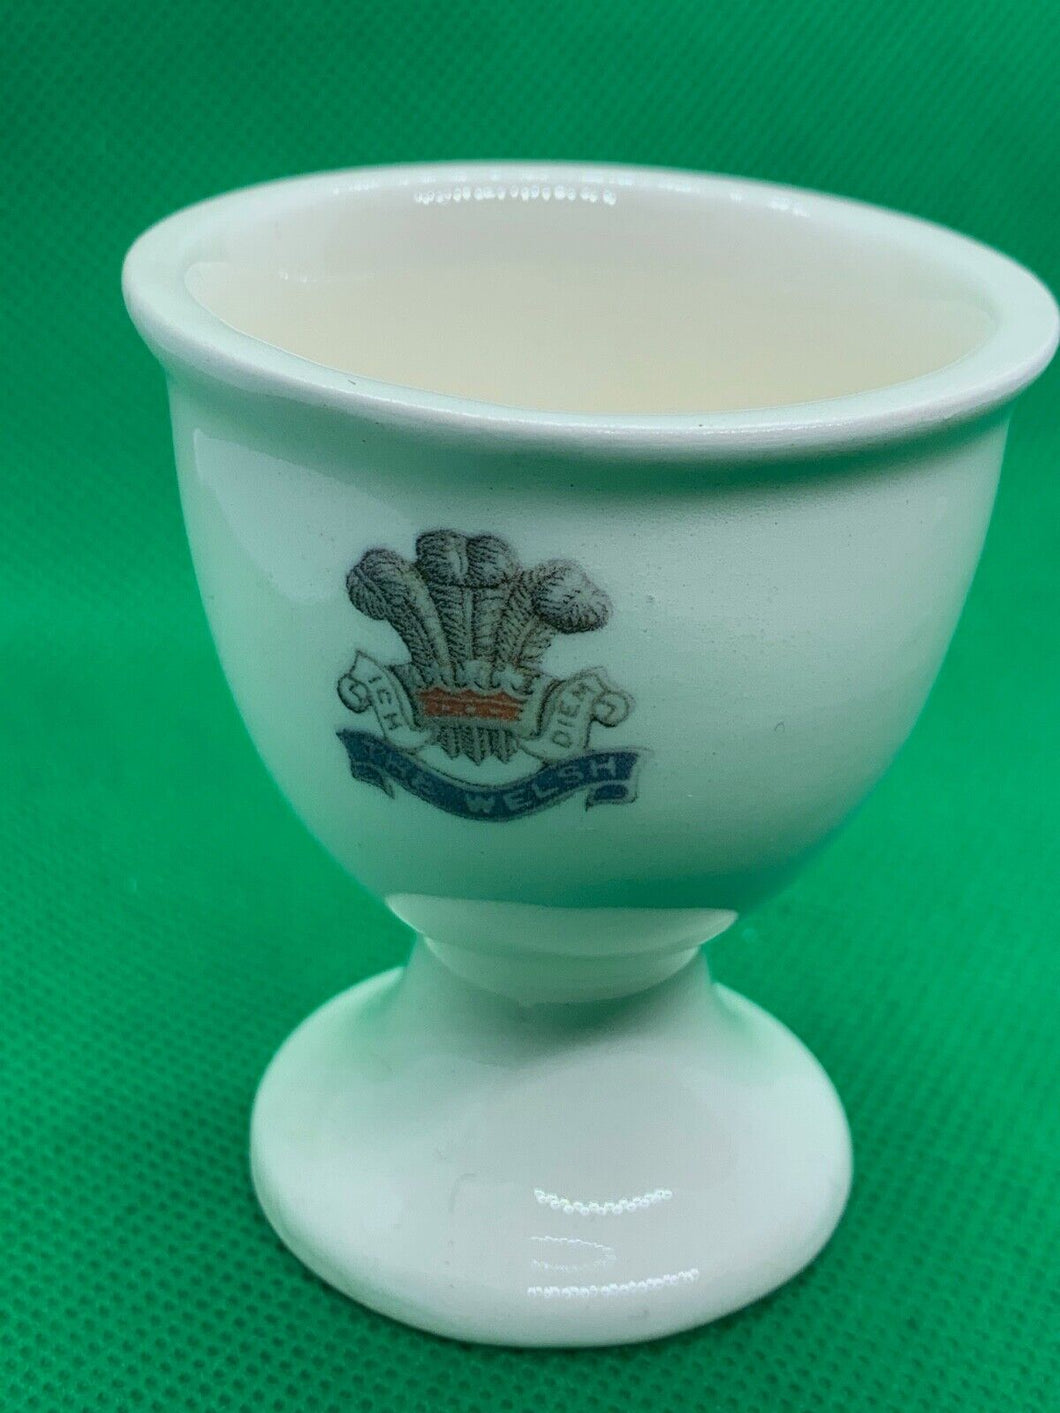 Badges of Empire Collectors Series Egg Cup - The Welsh - No 188